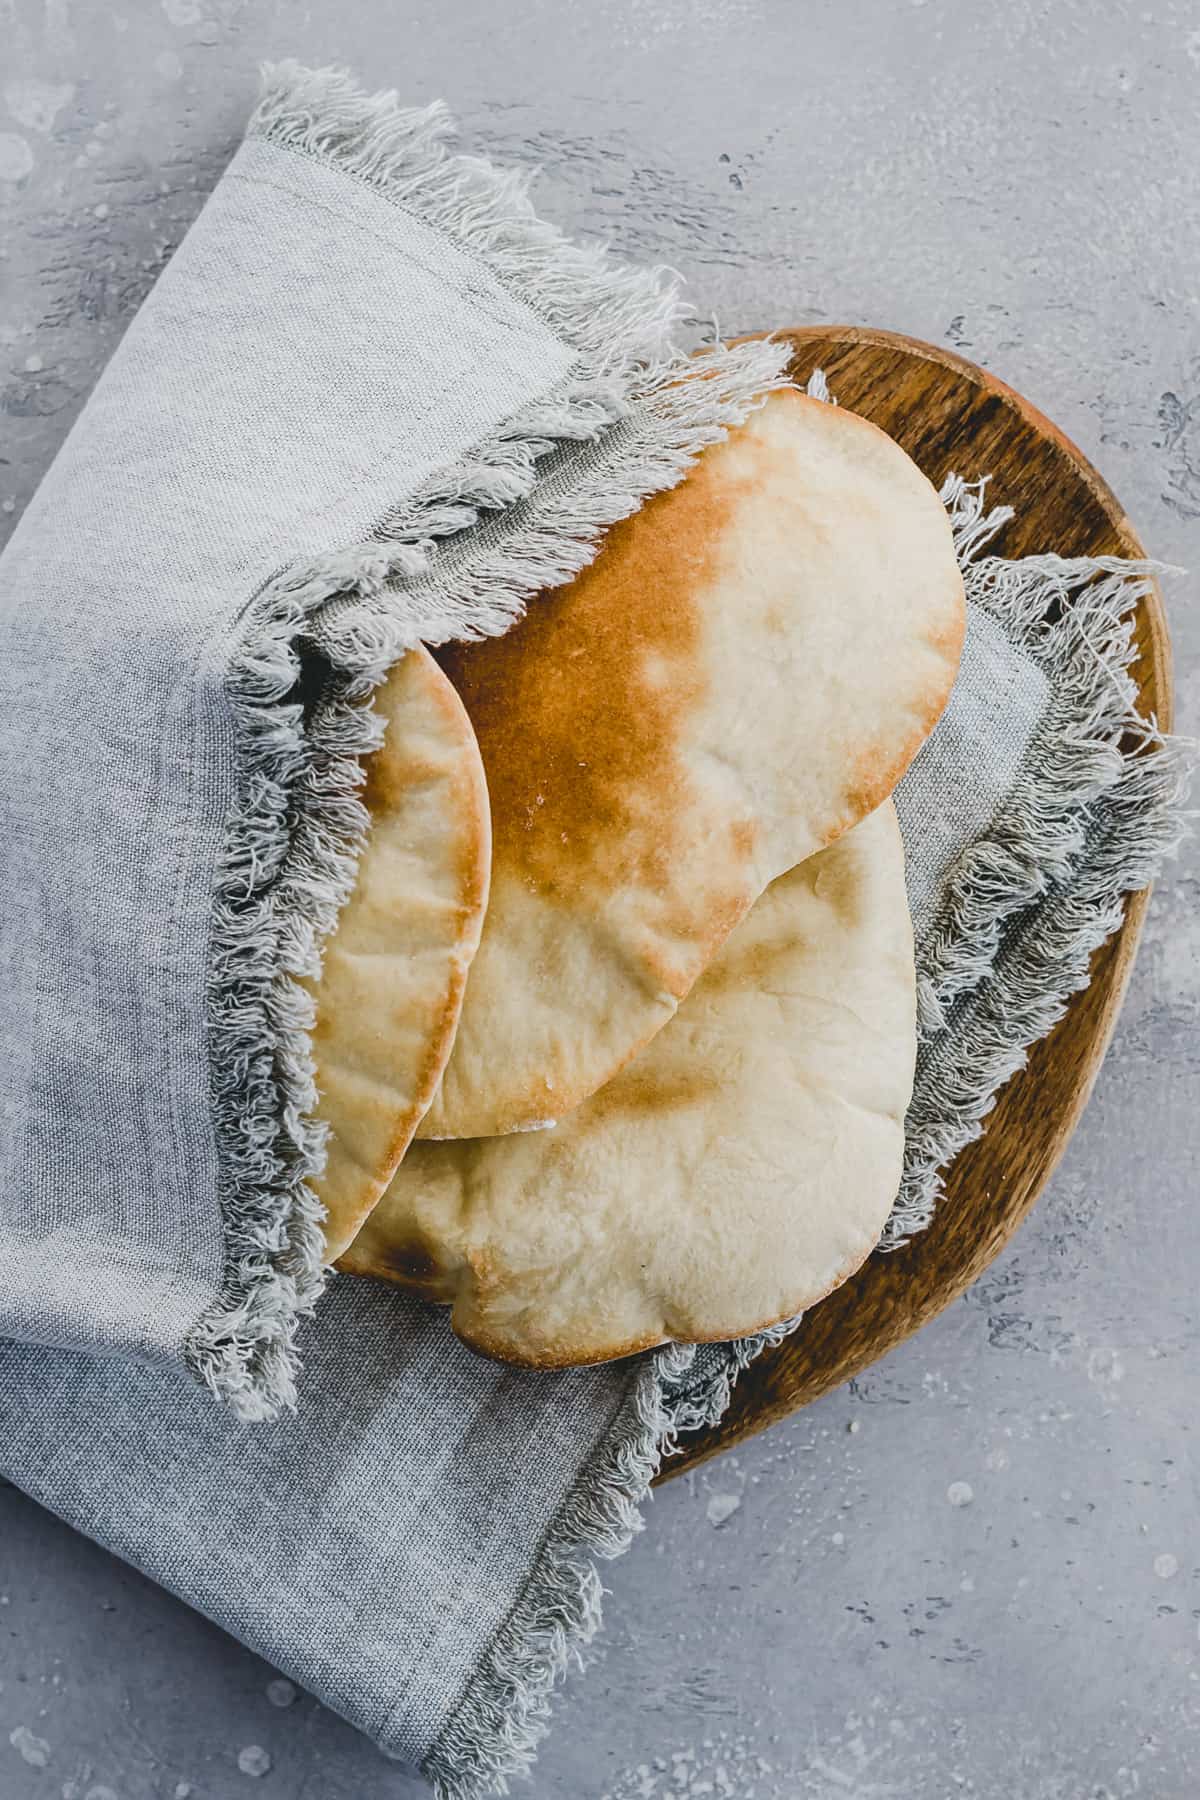 pita bread packed in a towel